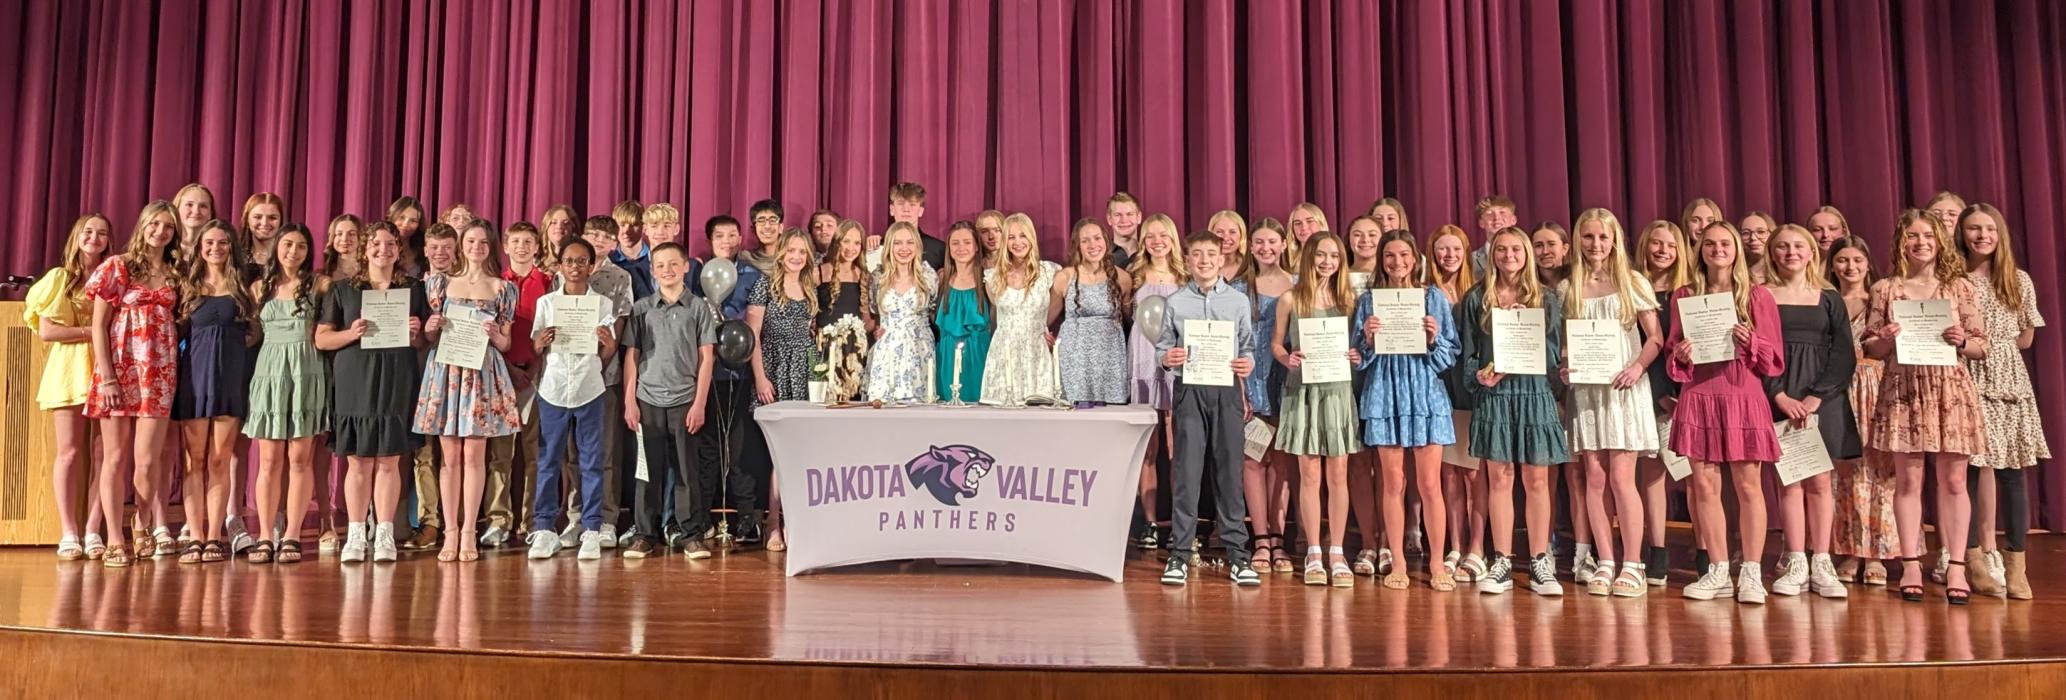 The Dakota Valley Middle School 2024 National Junior Honor Society induction happened on Monday, March 4. All current 7th and 8th grade members gathered on-stage at the end of the ceremony for congratulations and photos. Photos by Kelly Riibe • times2reporter@gmail.com